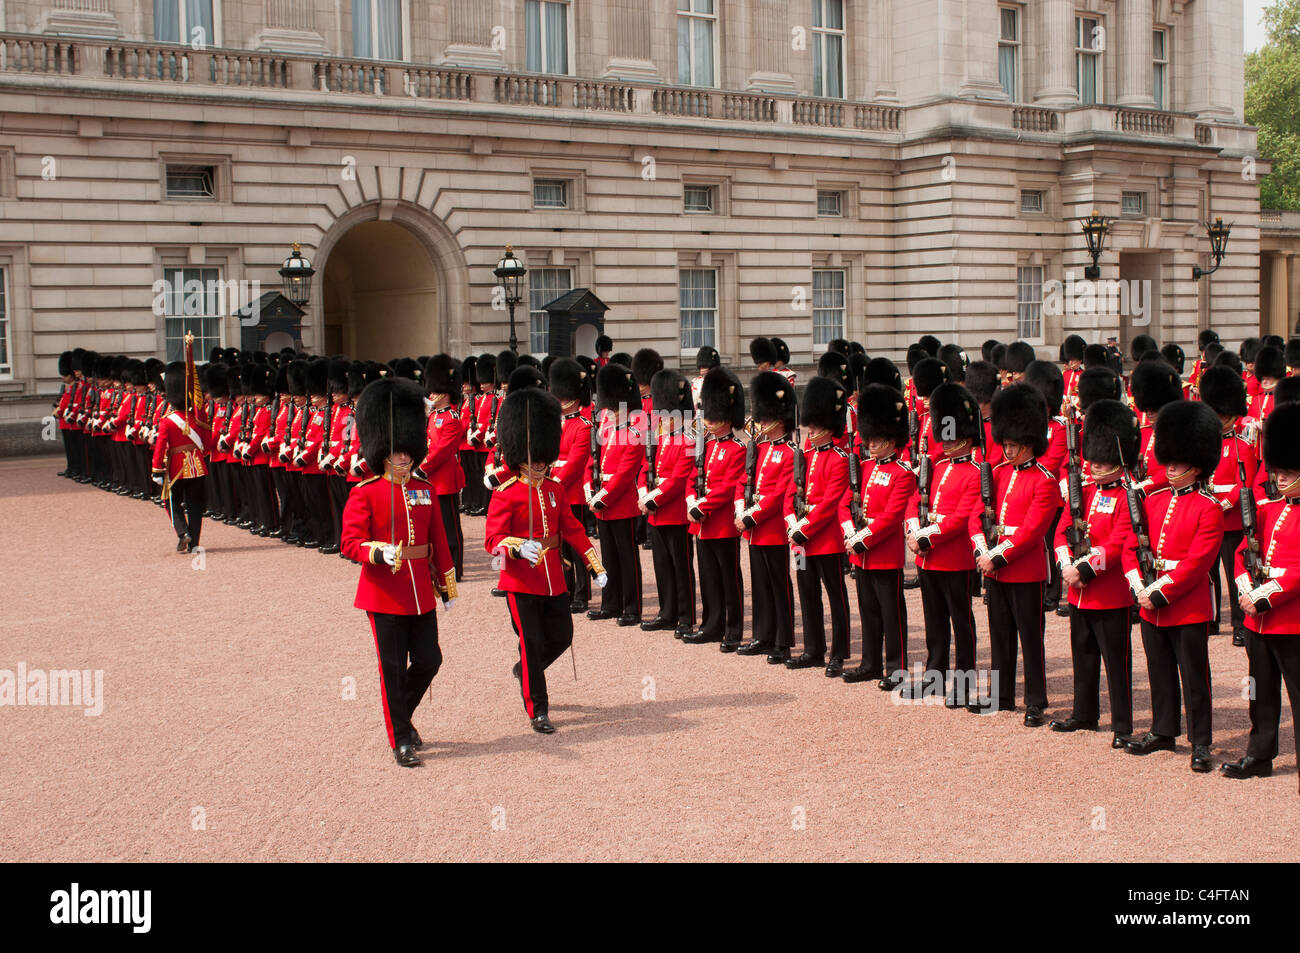 The Irish Guards regiment on ceremonial duty at Buckingham Palace in London. Stock Photo